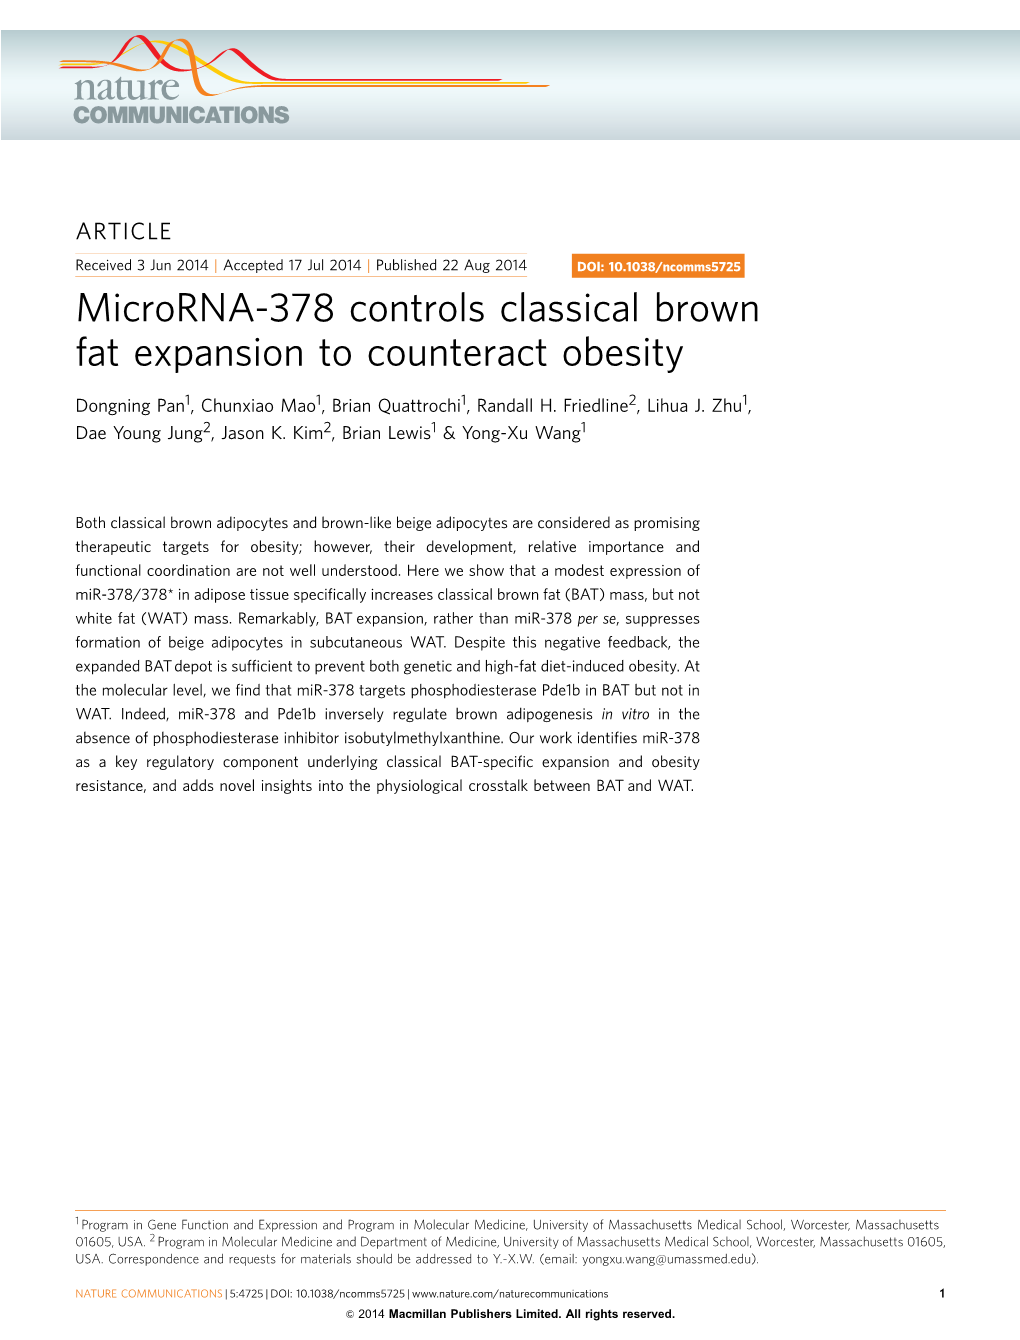 Microrna-378 Controls Classical Brown Fat Expansion to Counteract Obesity